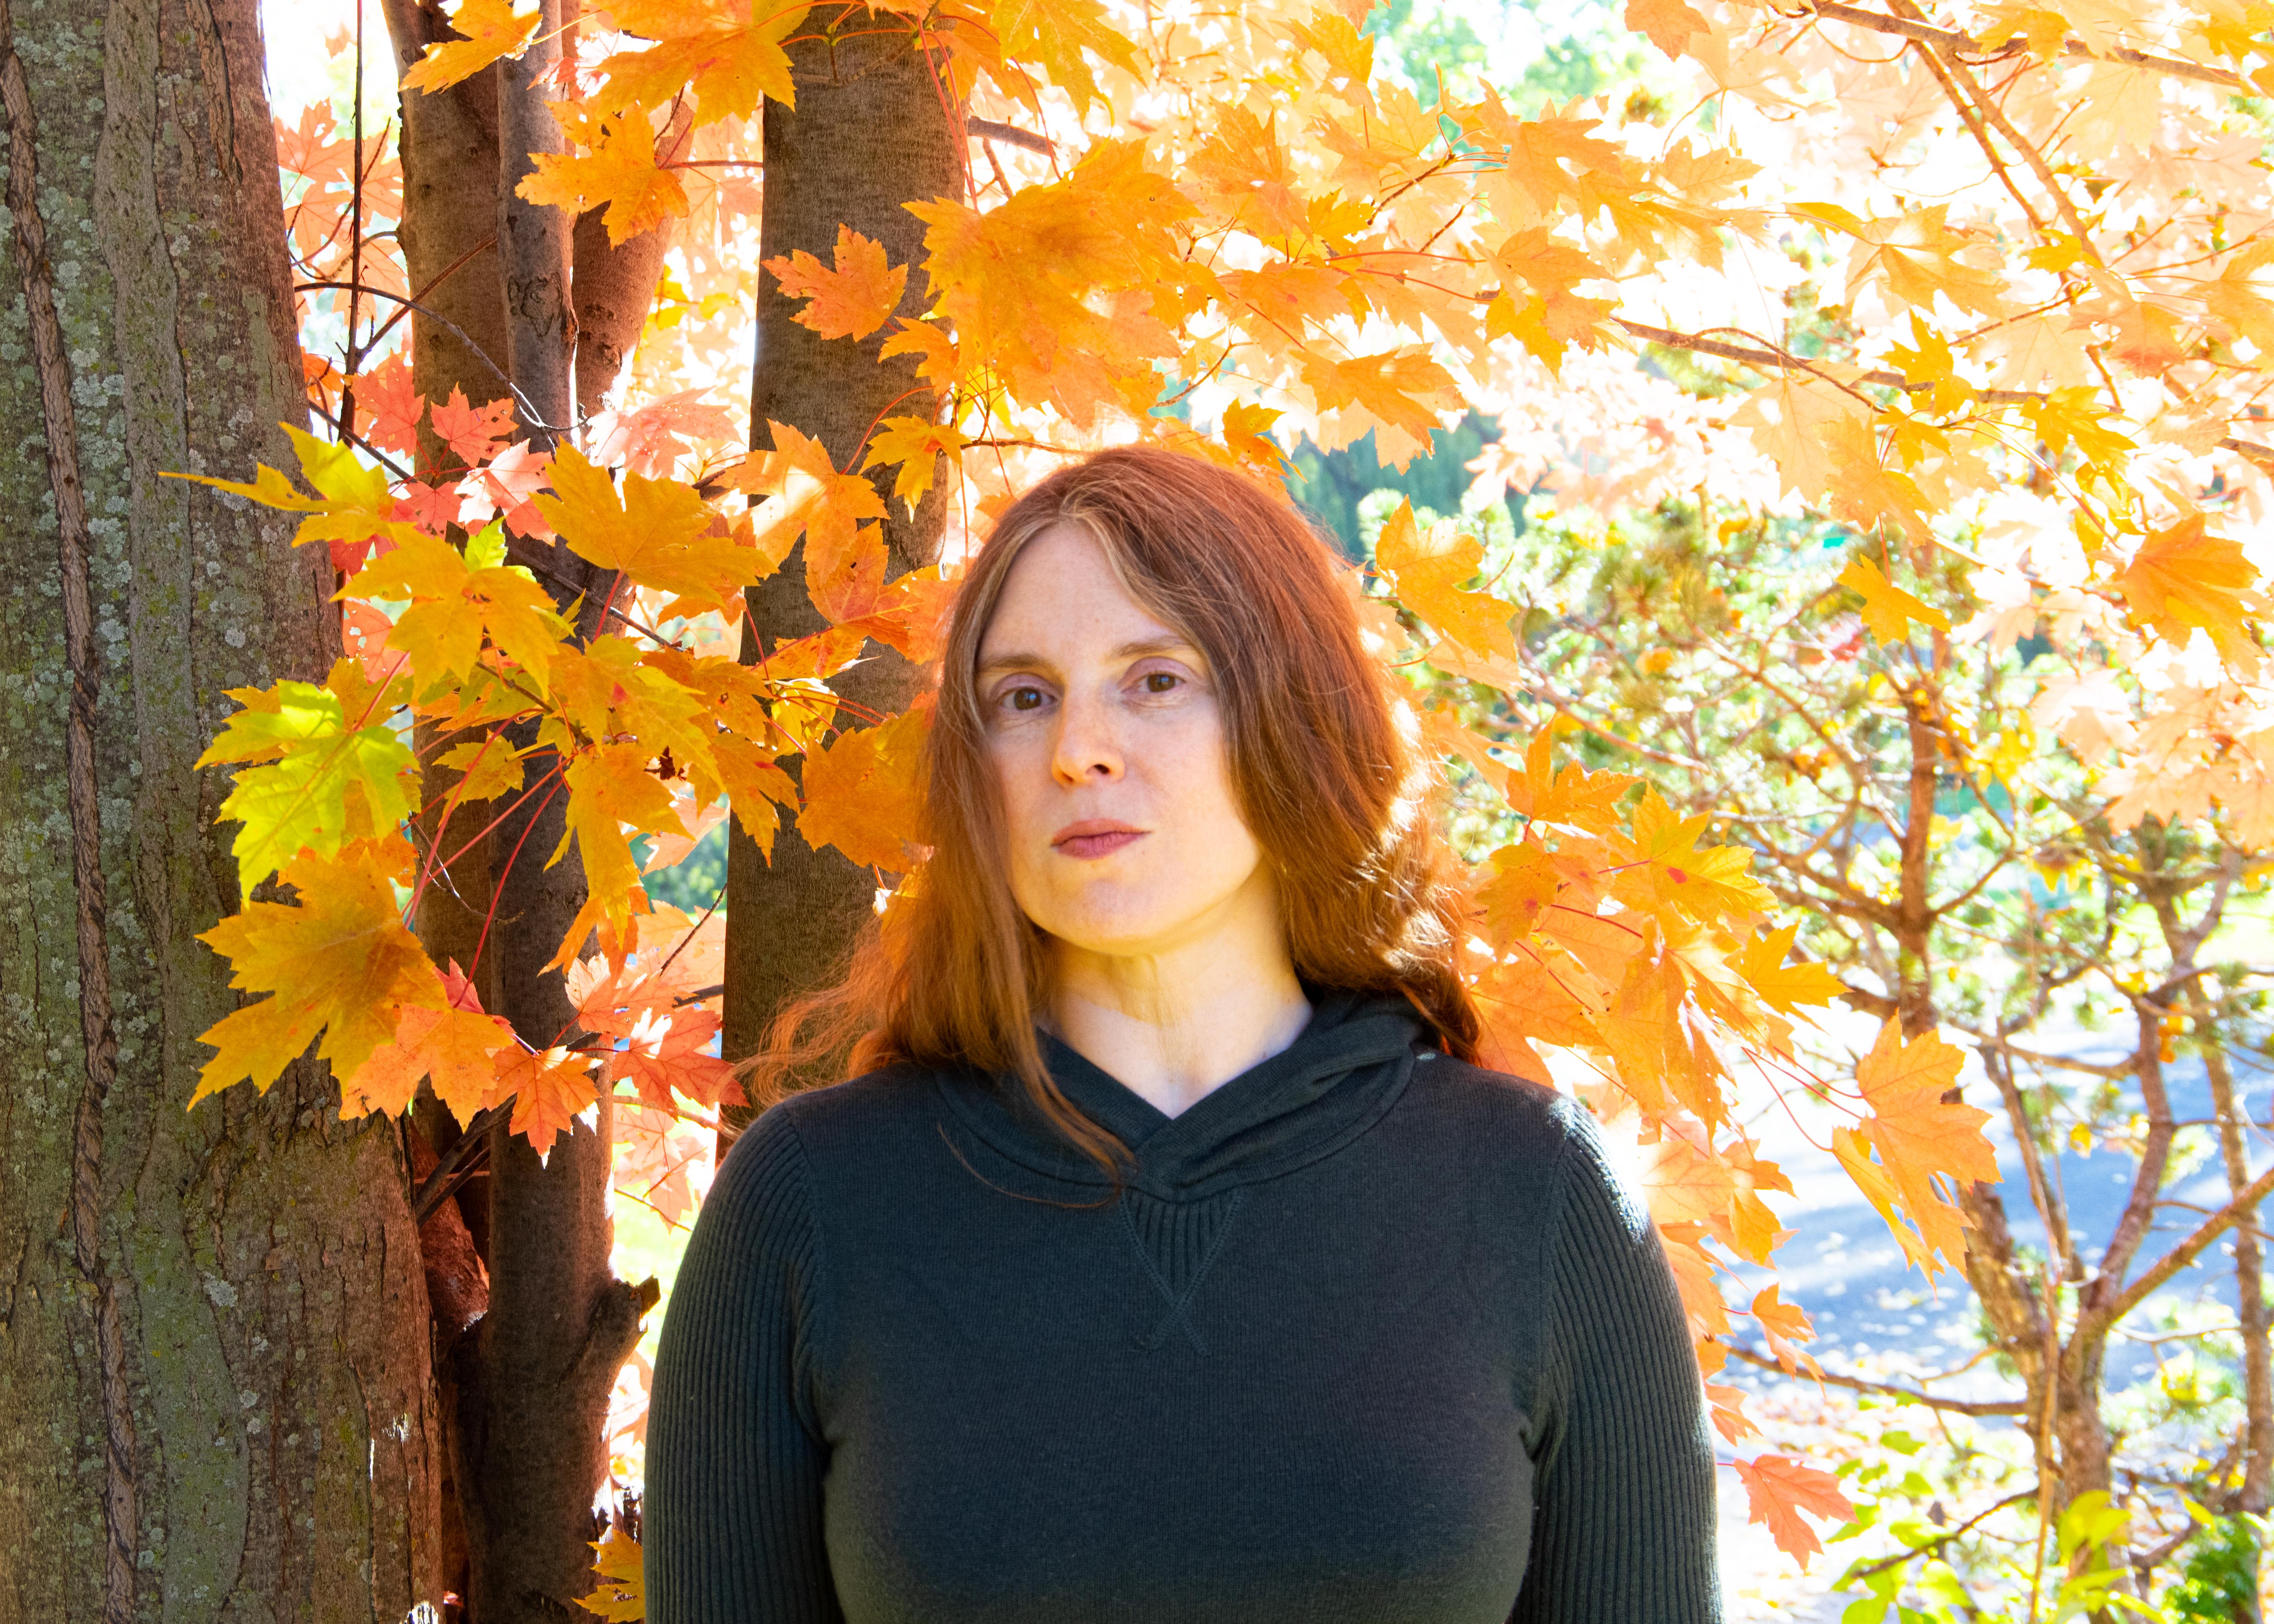 the author standing in front of fall foliage